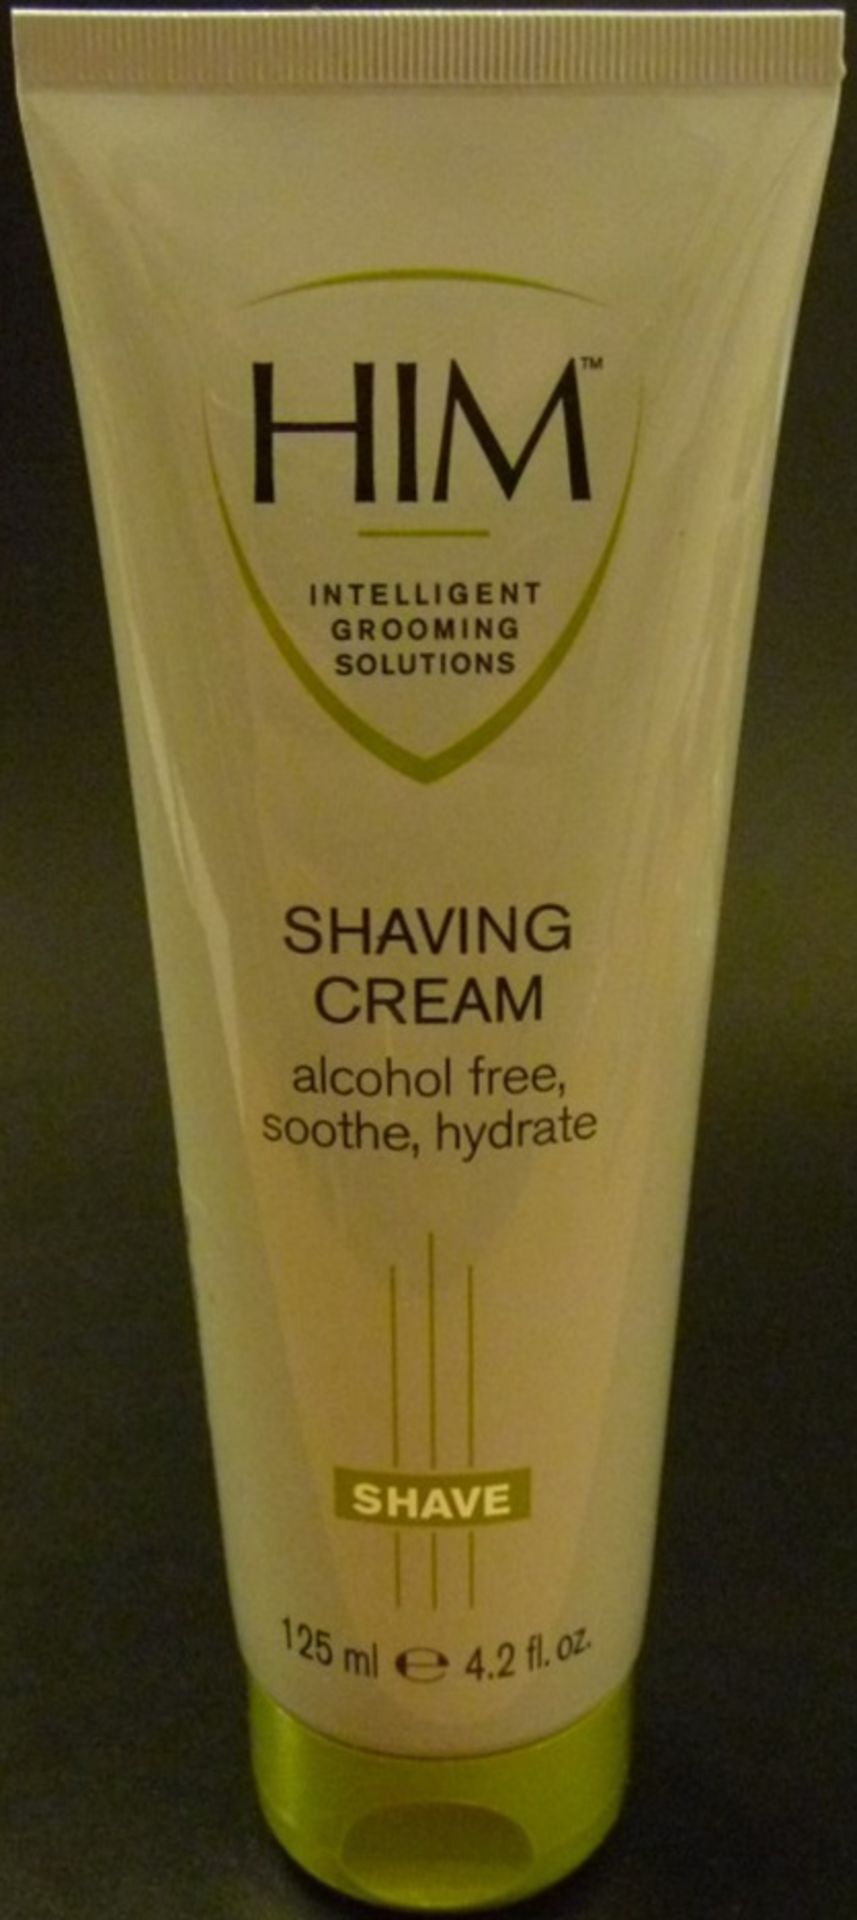 55 x HIM Intelligent Grooming Solutions - 125ml SHAVING CREAM - Brand New Stock - Alcohol Free, - Image 3 of 3